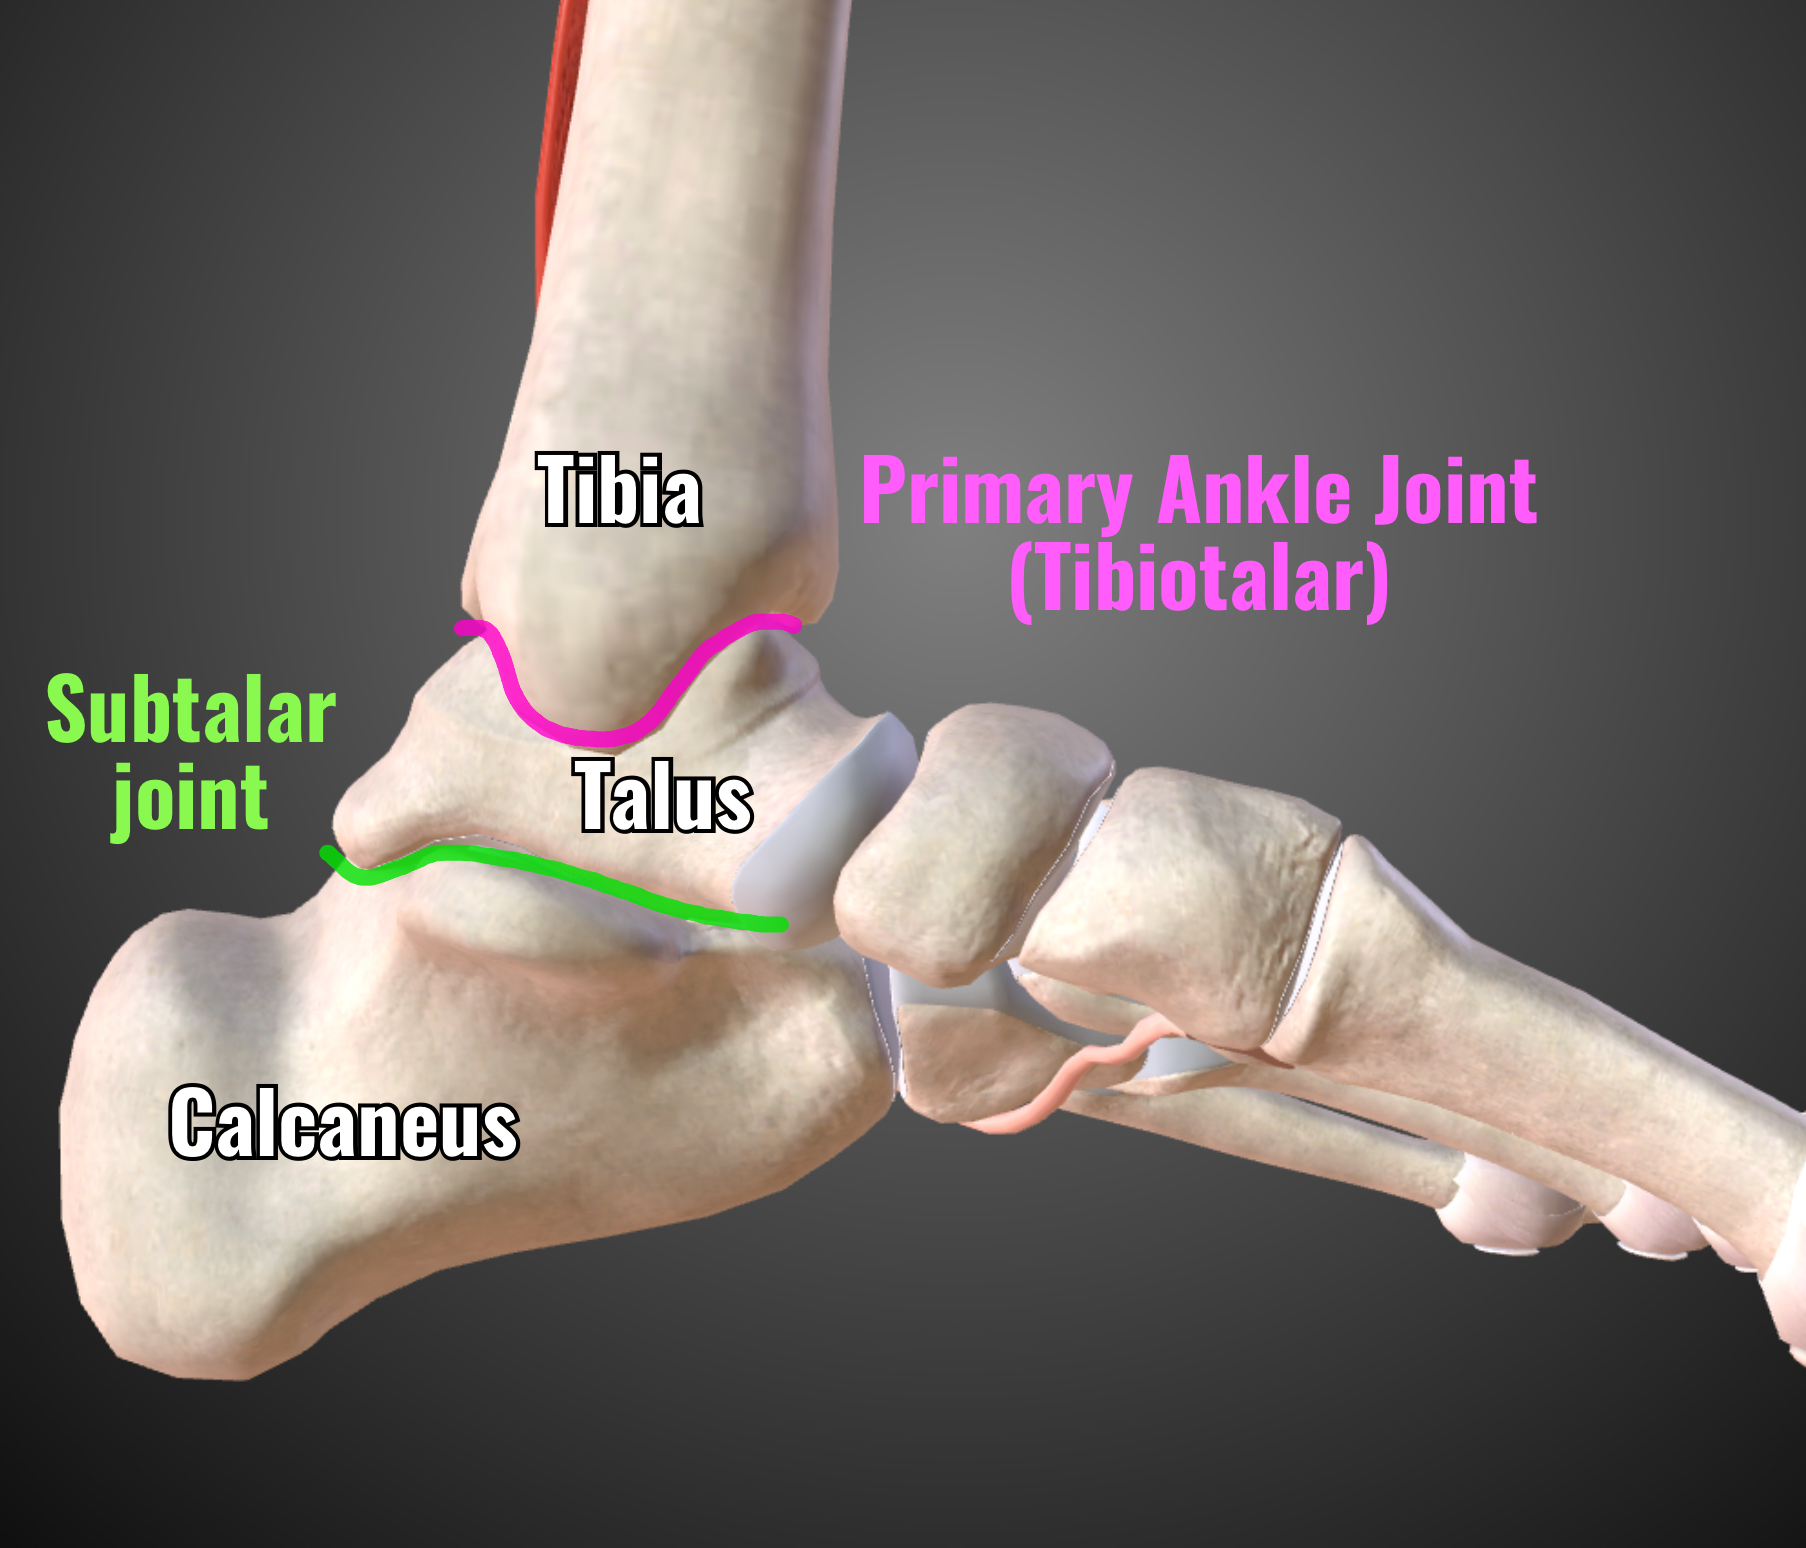 Brian Sutterer MD on X: The subtalar joint is not the primary ankle joint,  so while this is still a fusion, it's not as dramatic as thinking the whole ankle  joint is